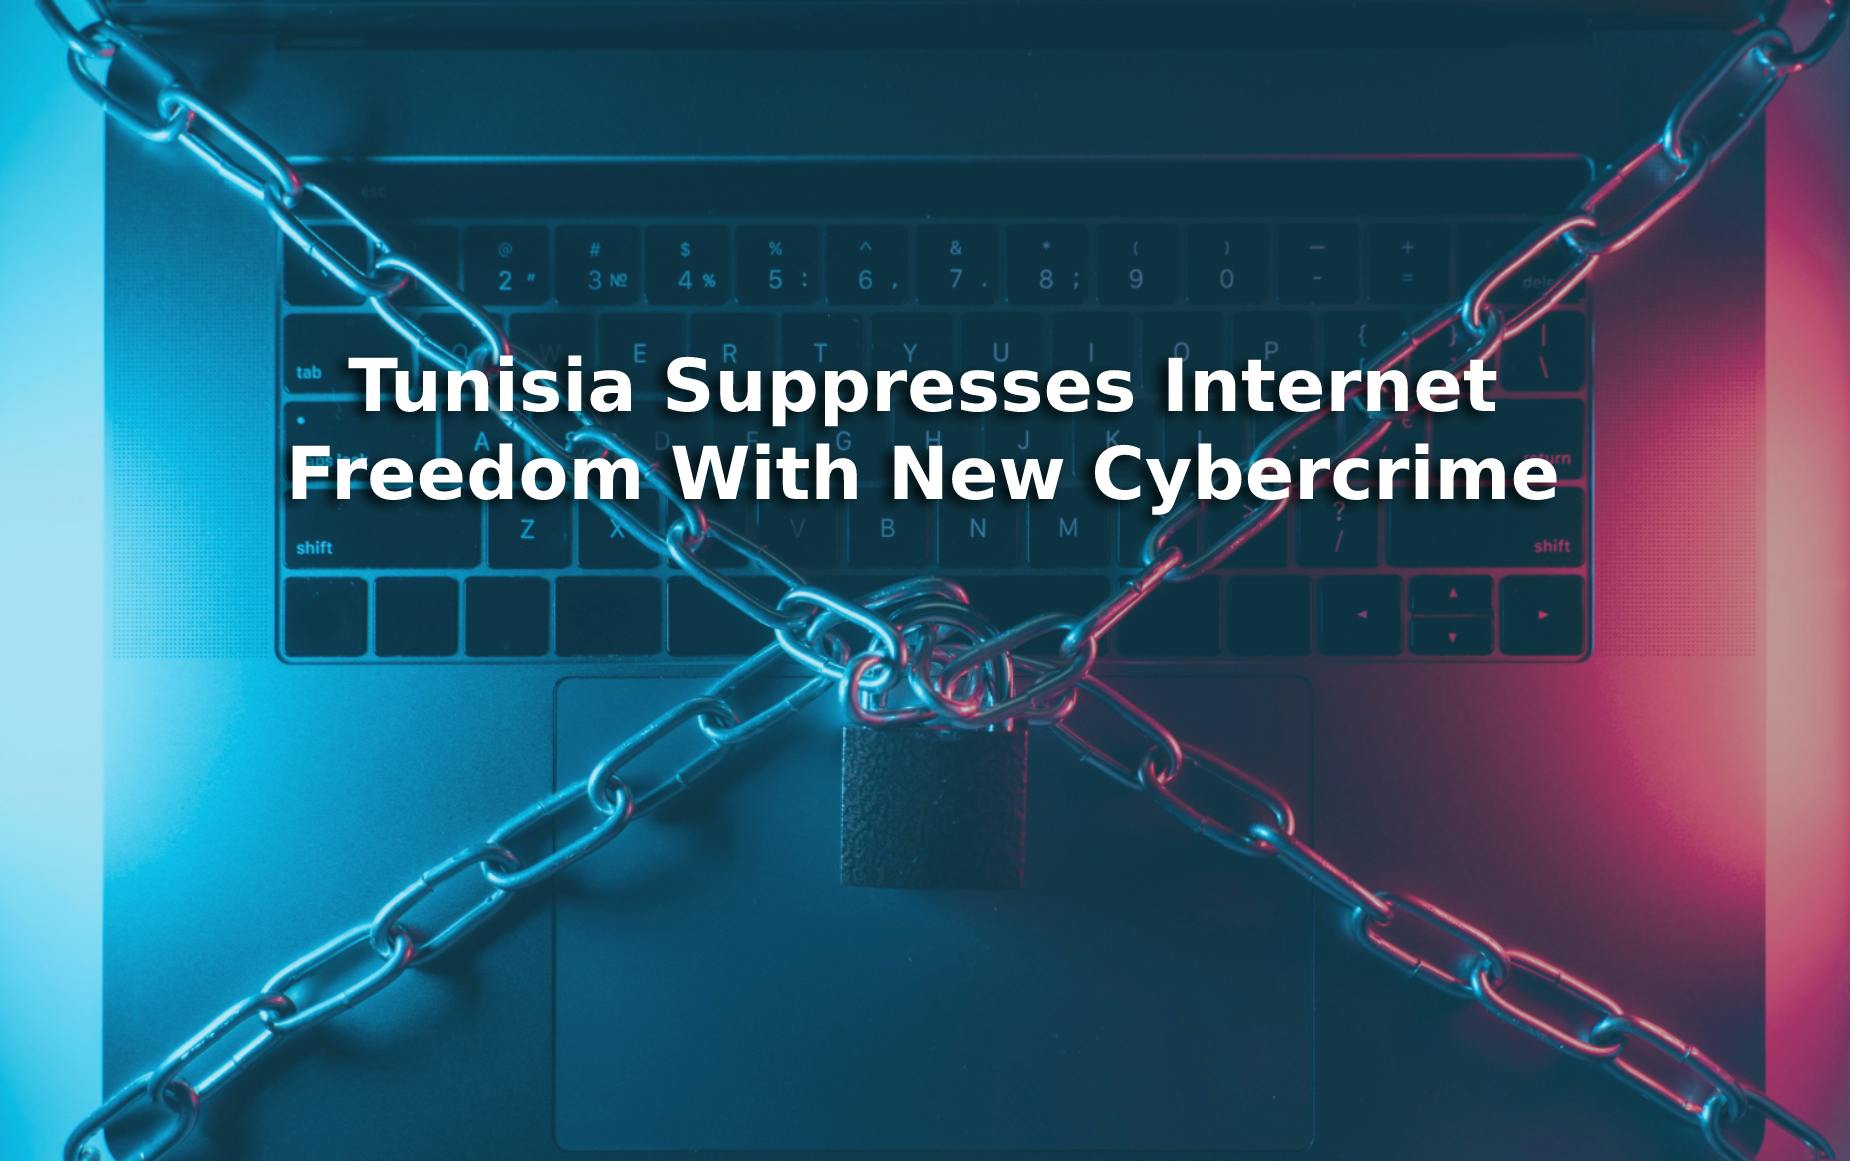 Tunisian Government Suppresses Freedom of Expression with New Cybercrime Law